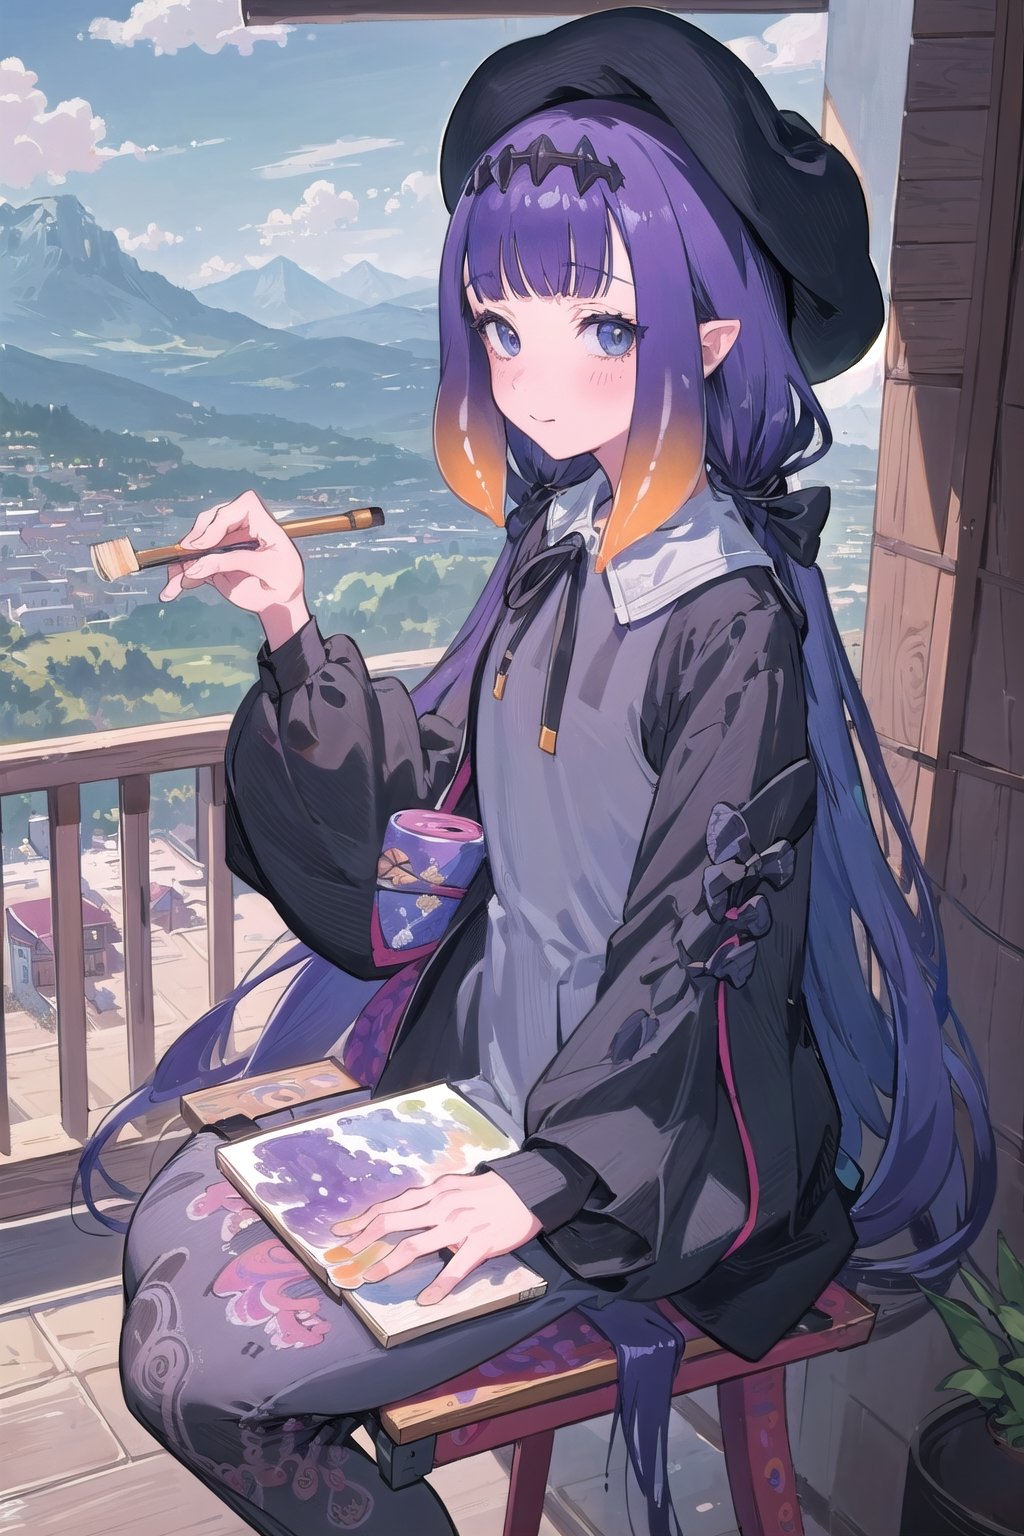 (((best quality, 8k wallpaper))), ((detailed eyes, detailed illustration, masterpiece)),
ninomae ina'nis, inapainter, tentacle hair, long hair, cute grey dress, beret, painting on a easel, holding a paint brush, balcony scenery, blue cloudy sky scenery, plants and flowers, mountains scenery